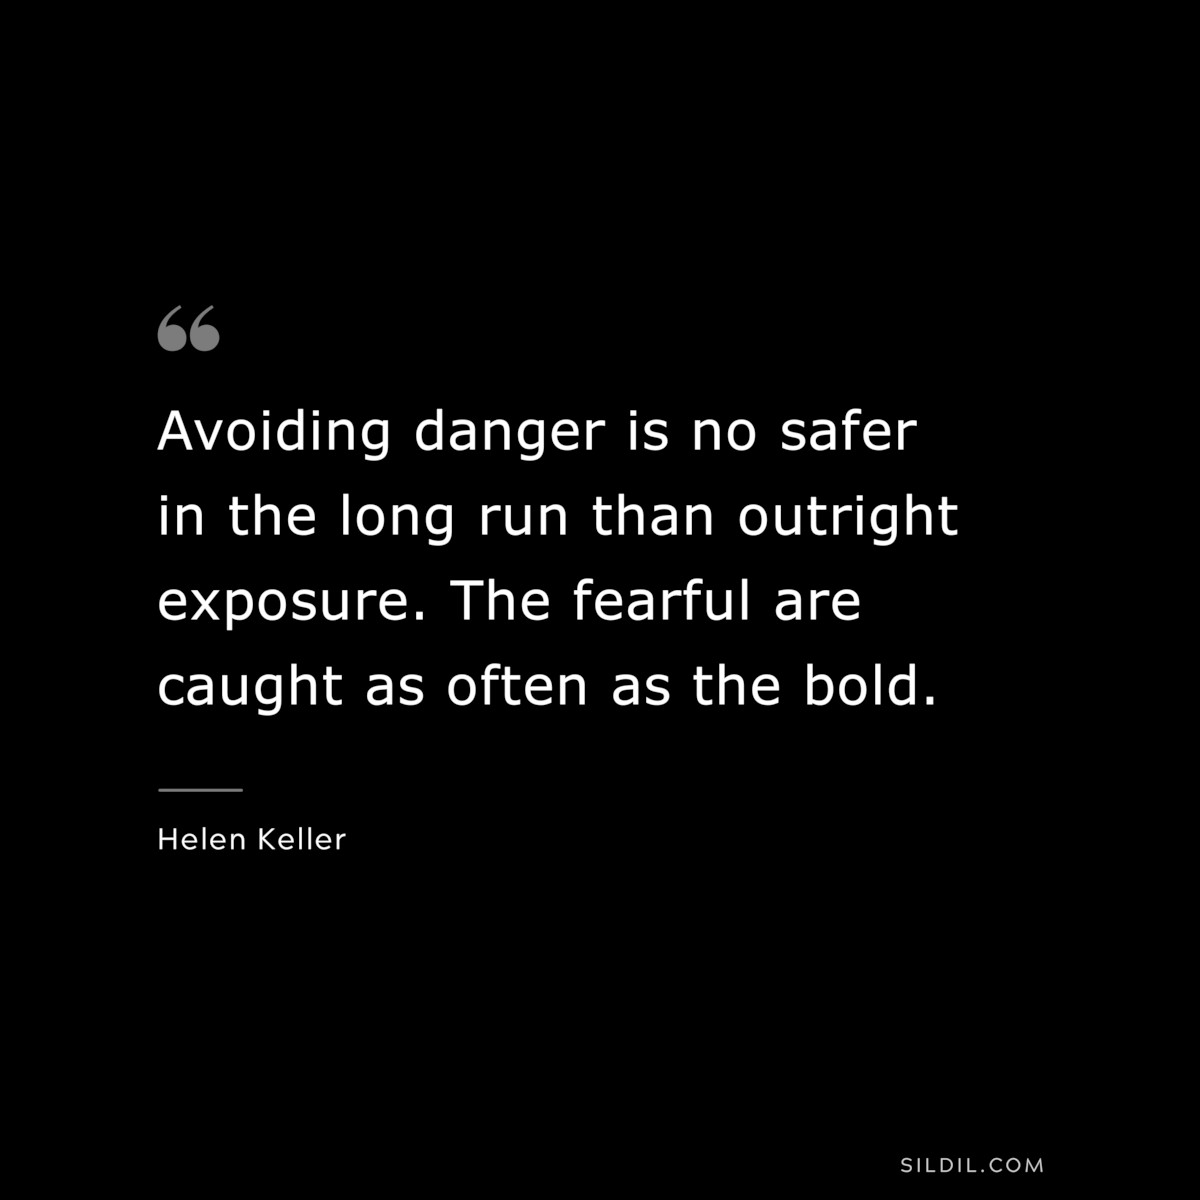 Avoiding danger is no safer in the long run than outright exposure. The fearful are caught as often as the bold. ― Helen Keller